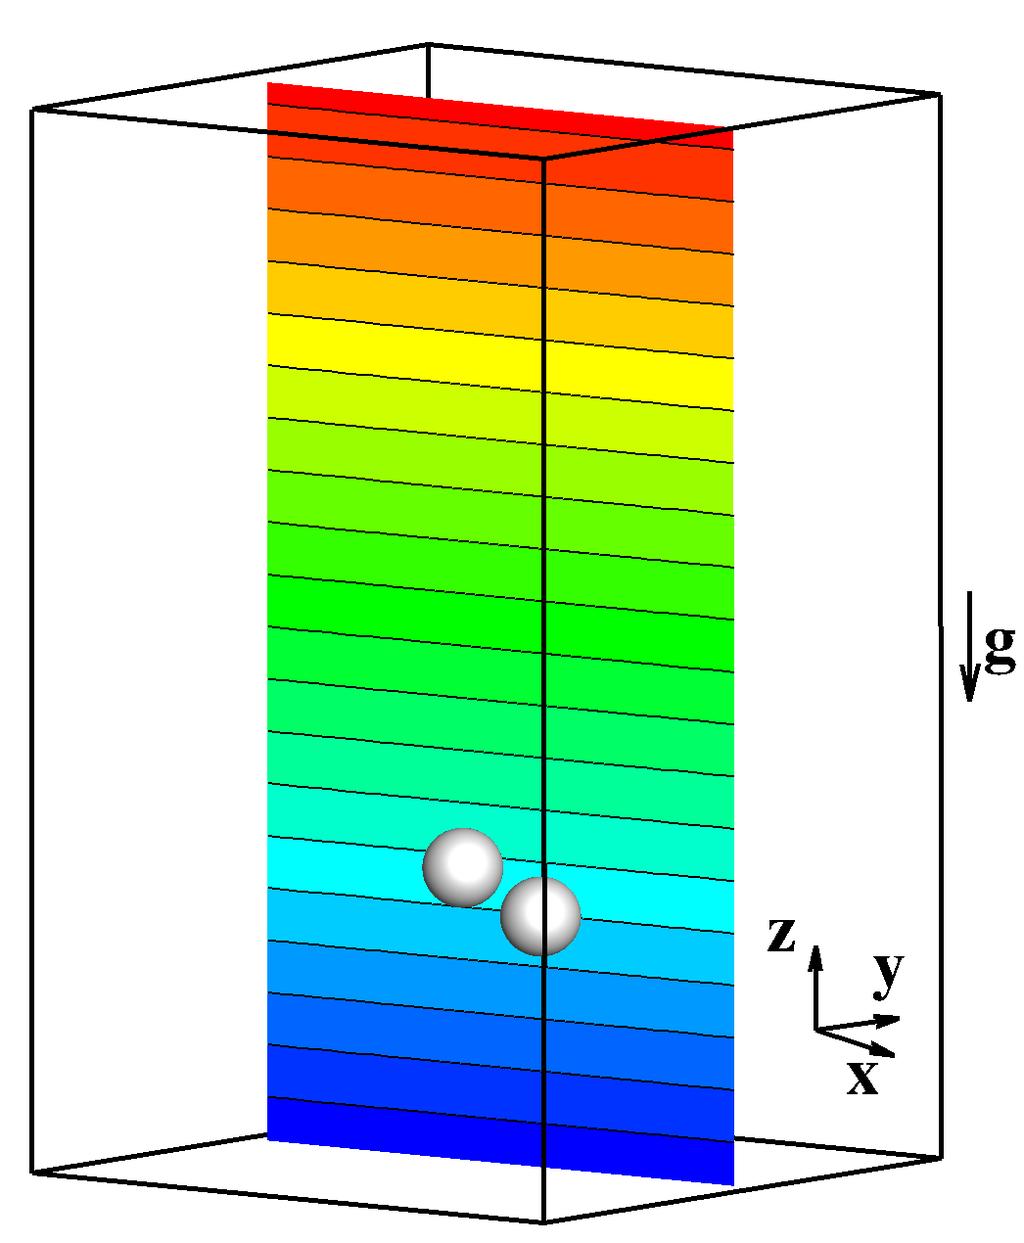 In the Stokes regime, Ardekani and Stocker [10] used the solution of point-force singularities in Stokes flow of a stratified fluid and showed that density stratification affects the motion of